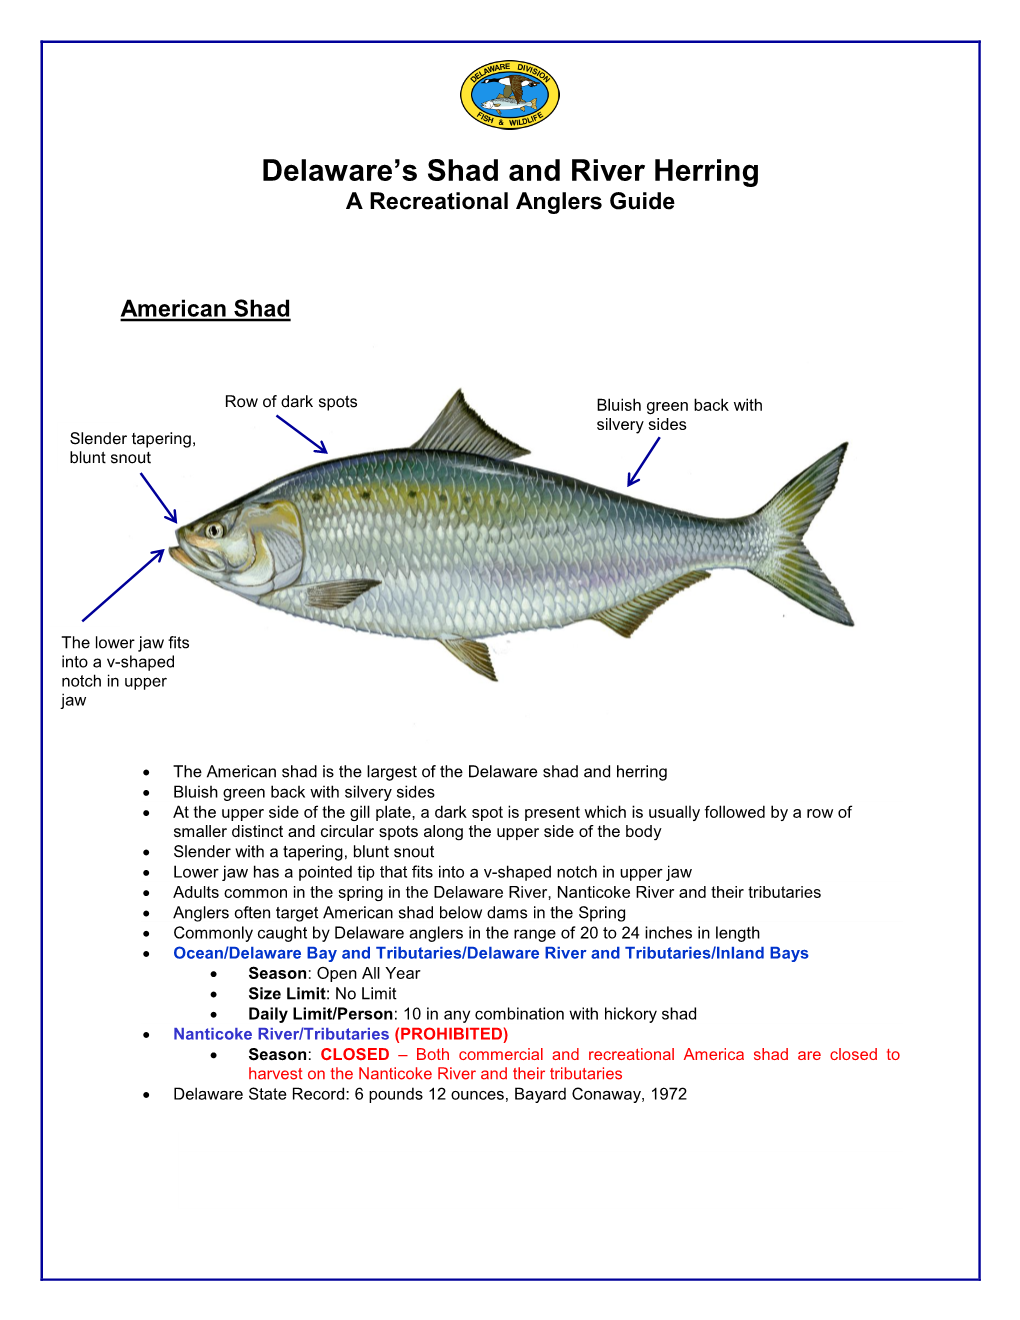 Delaware's Shad and River Herring